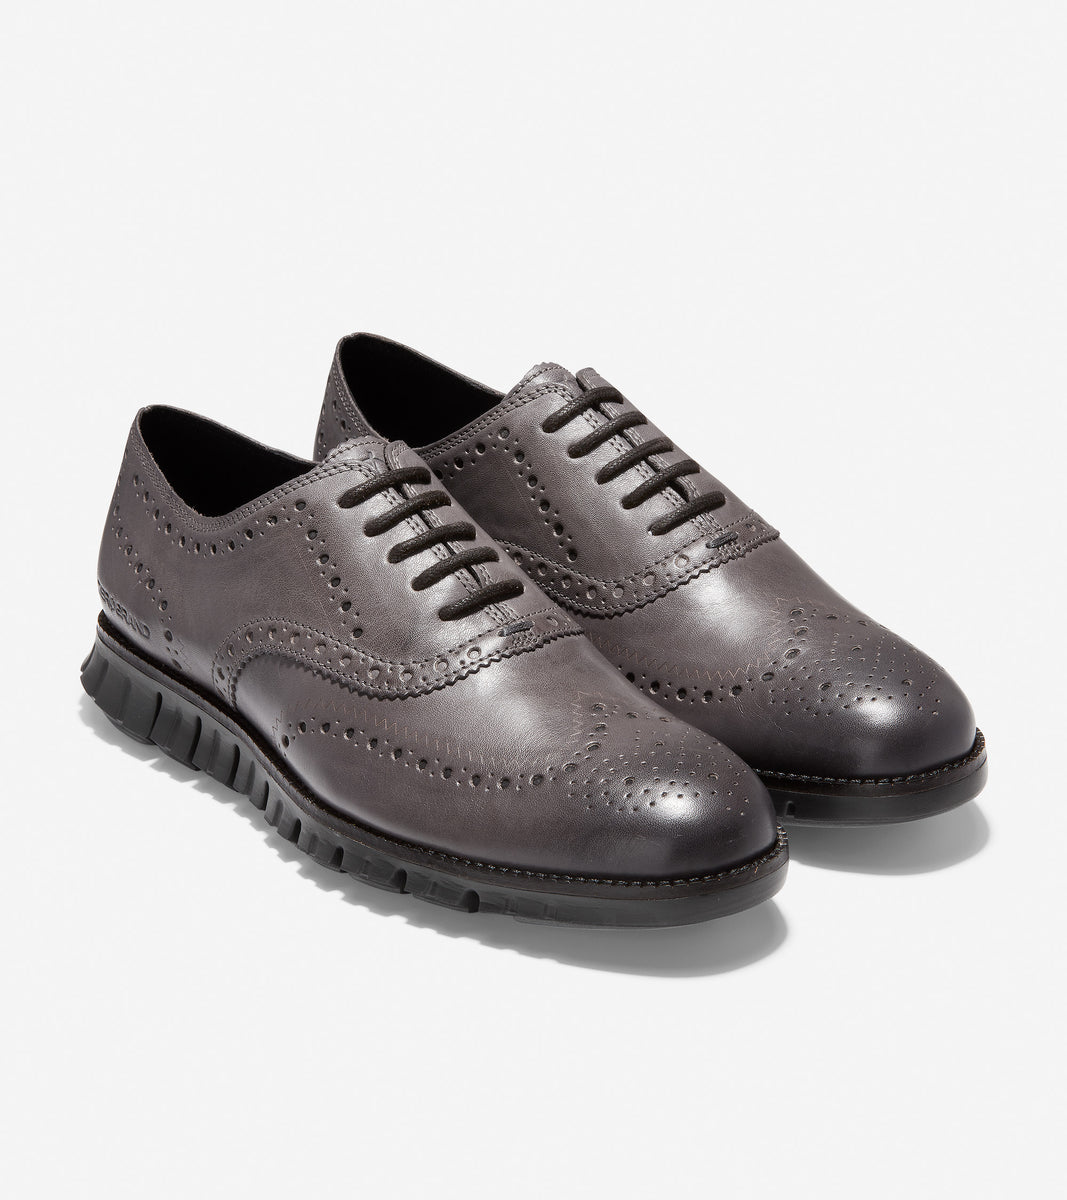 ColeHaan-ZERØGRAND Wingtip Oxford-c30720-Burnished Pavement Leather